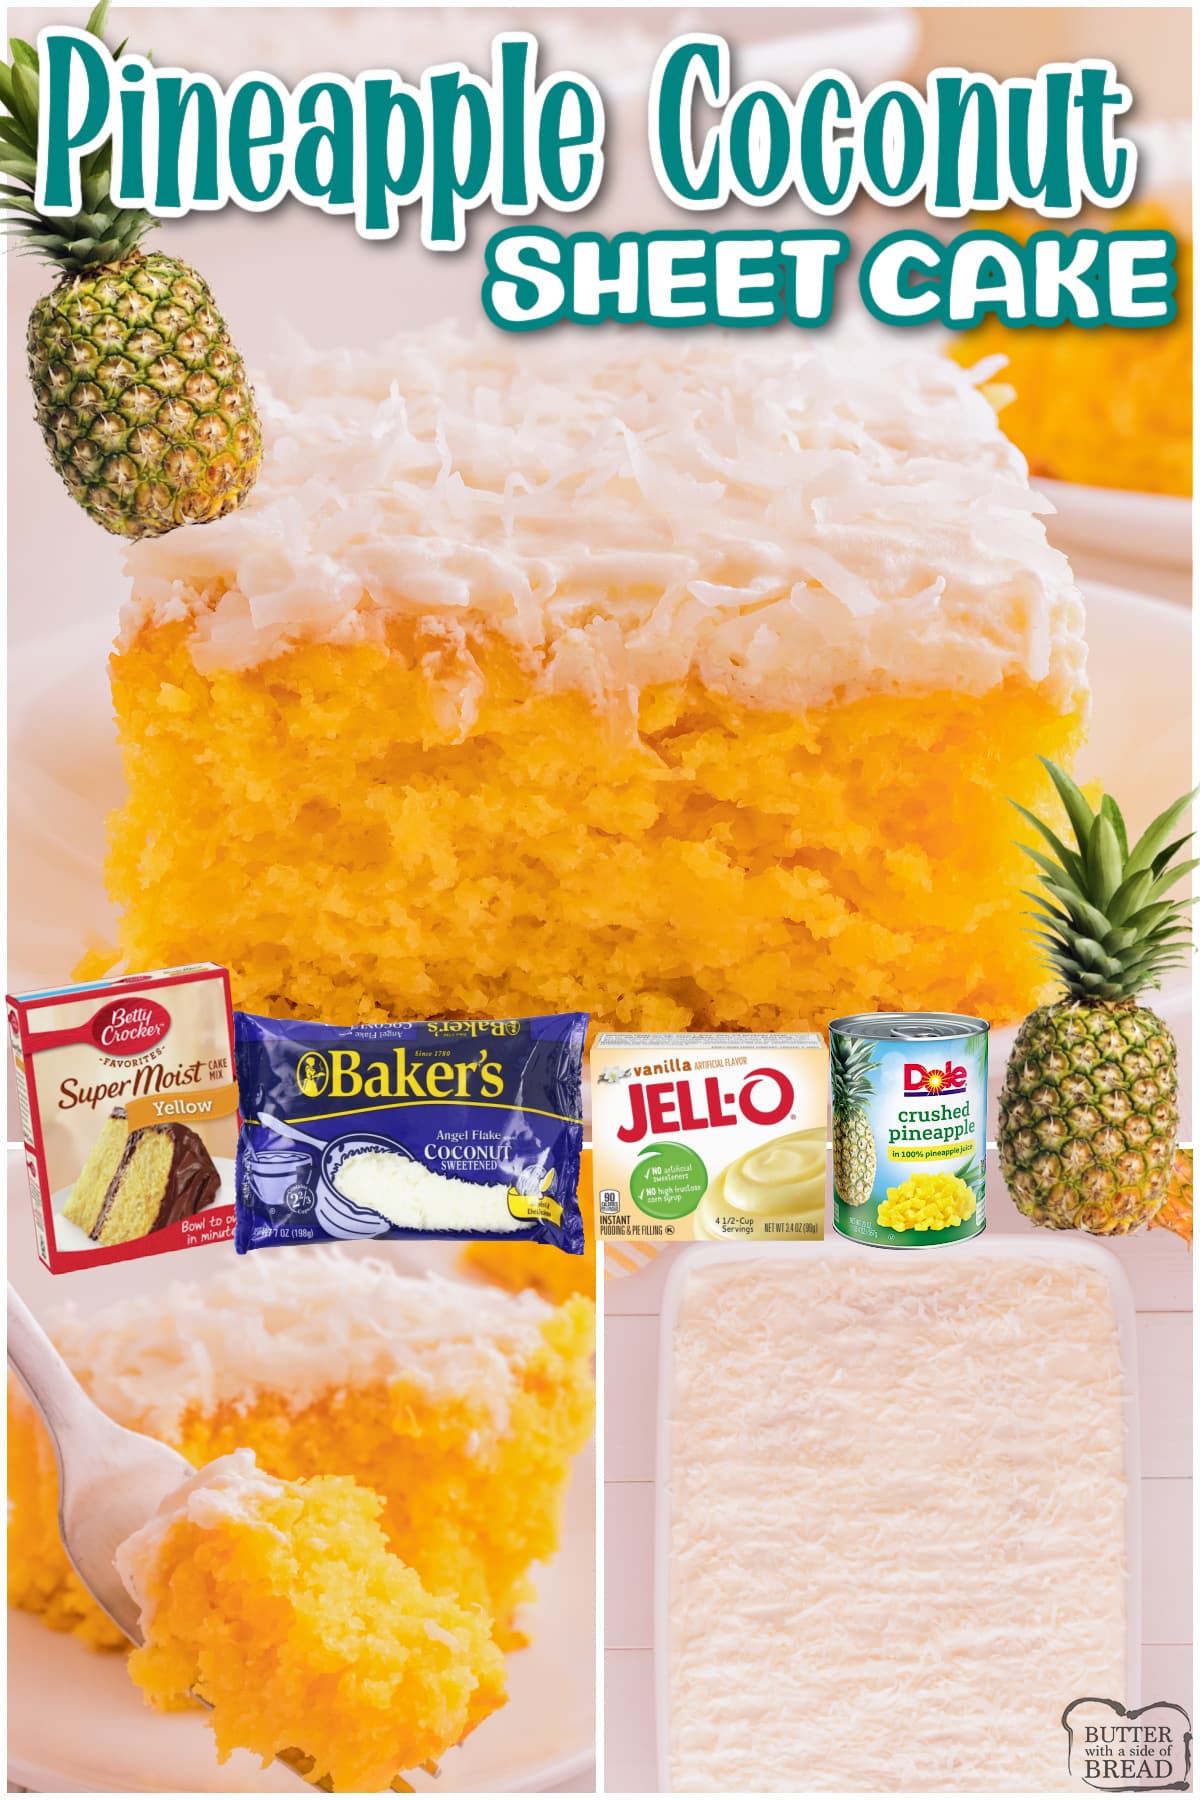 Pineapple Coconut Cake that's made with a boxed cake mix, instant pudding mix and topped with a delicious coconut whipped cream frosting & shredded coconut. Amazing tropical flavored sheet cake recipe!